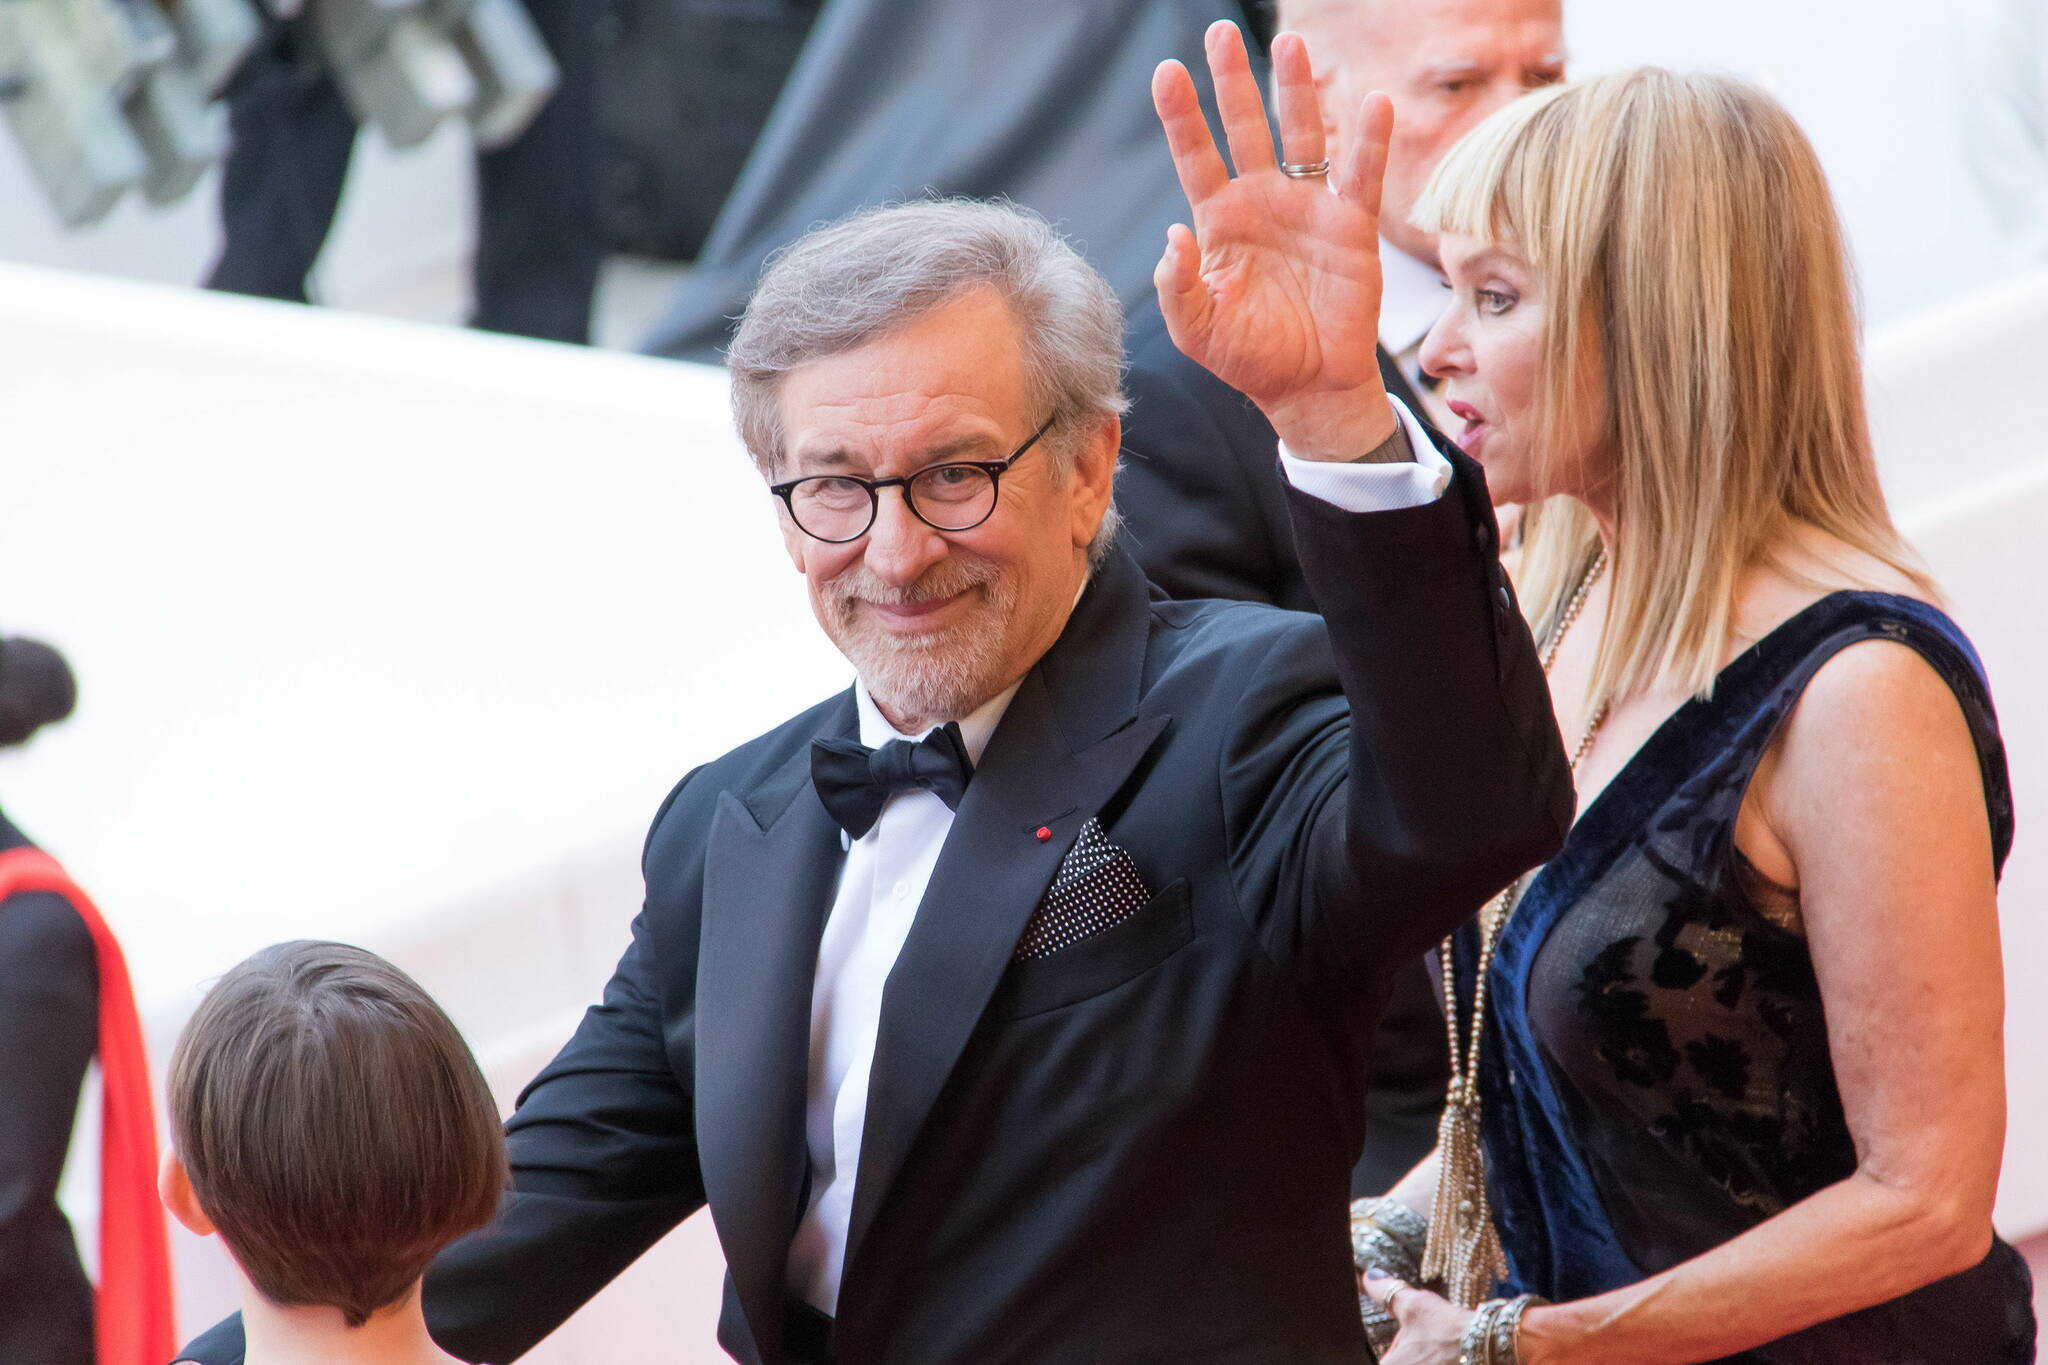 Steven Speilberg waves to someone on May 15, 2016 during the Cannes film festival in Cannes, France. (Visual/Zuma Press/TNS)